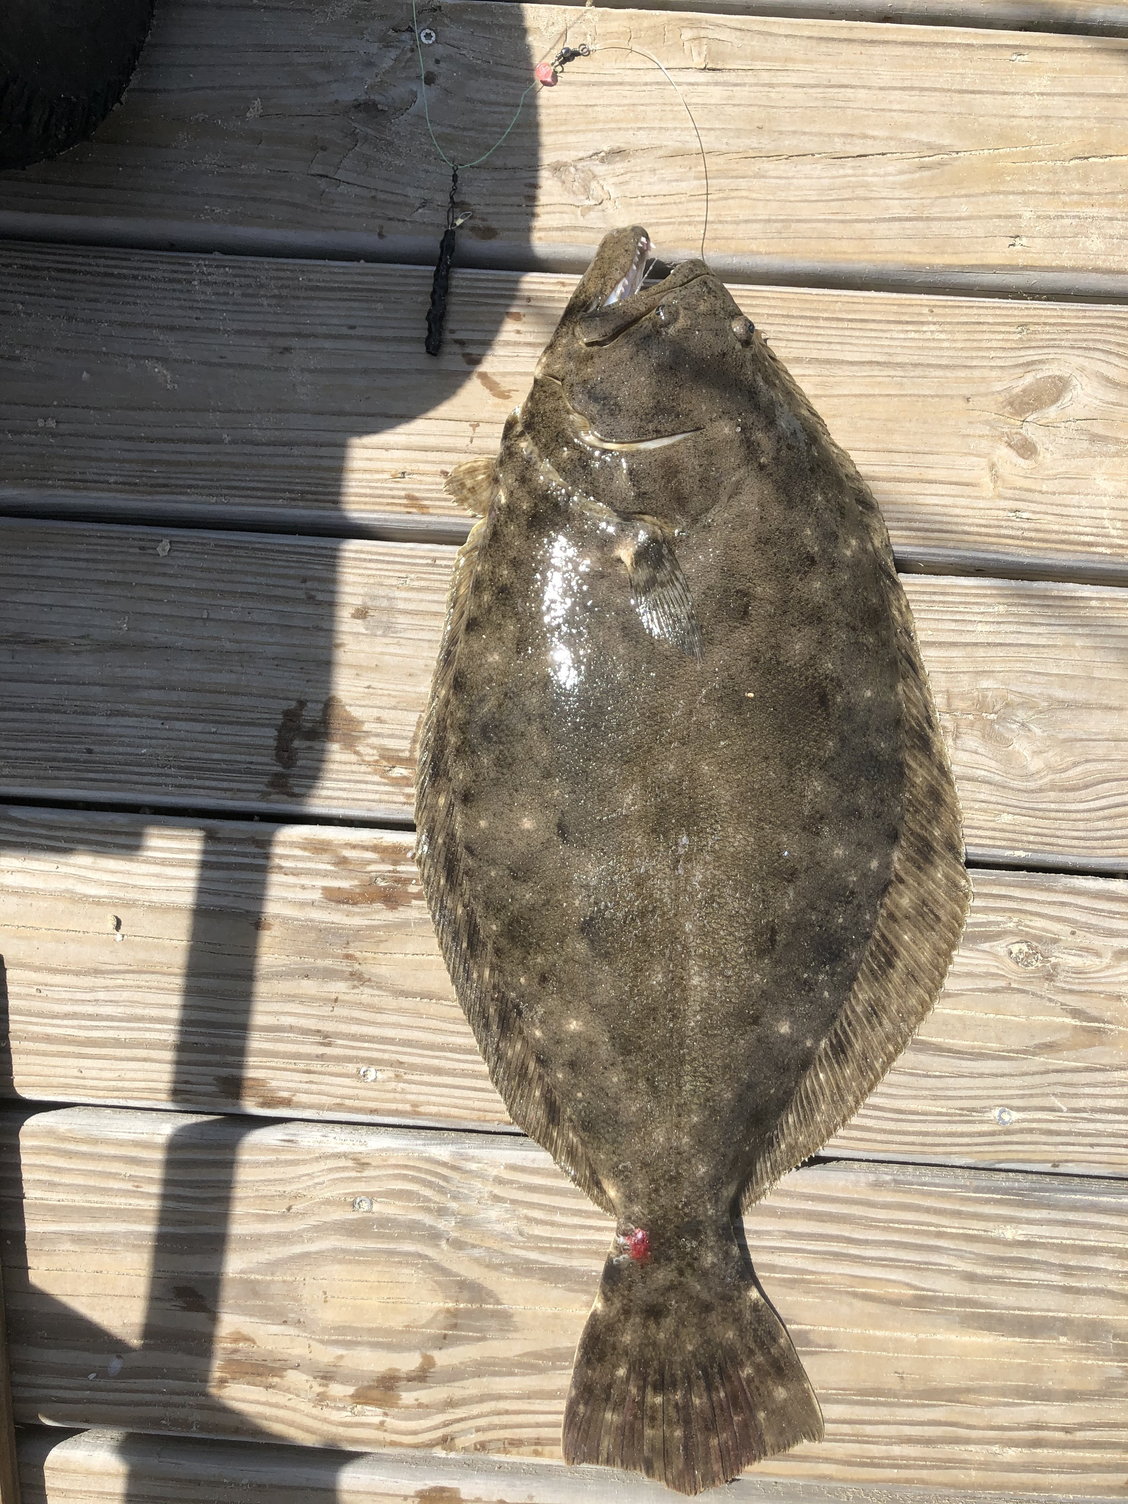 Flounder, summer and southern - The Hull Truth - Boating and